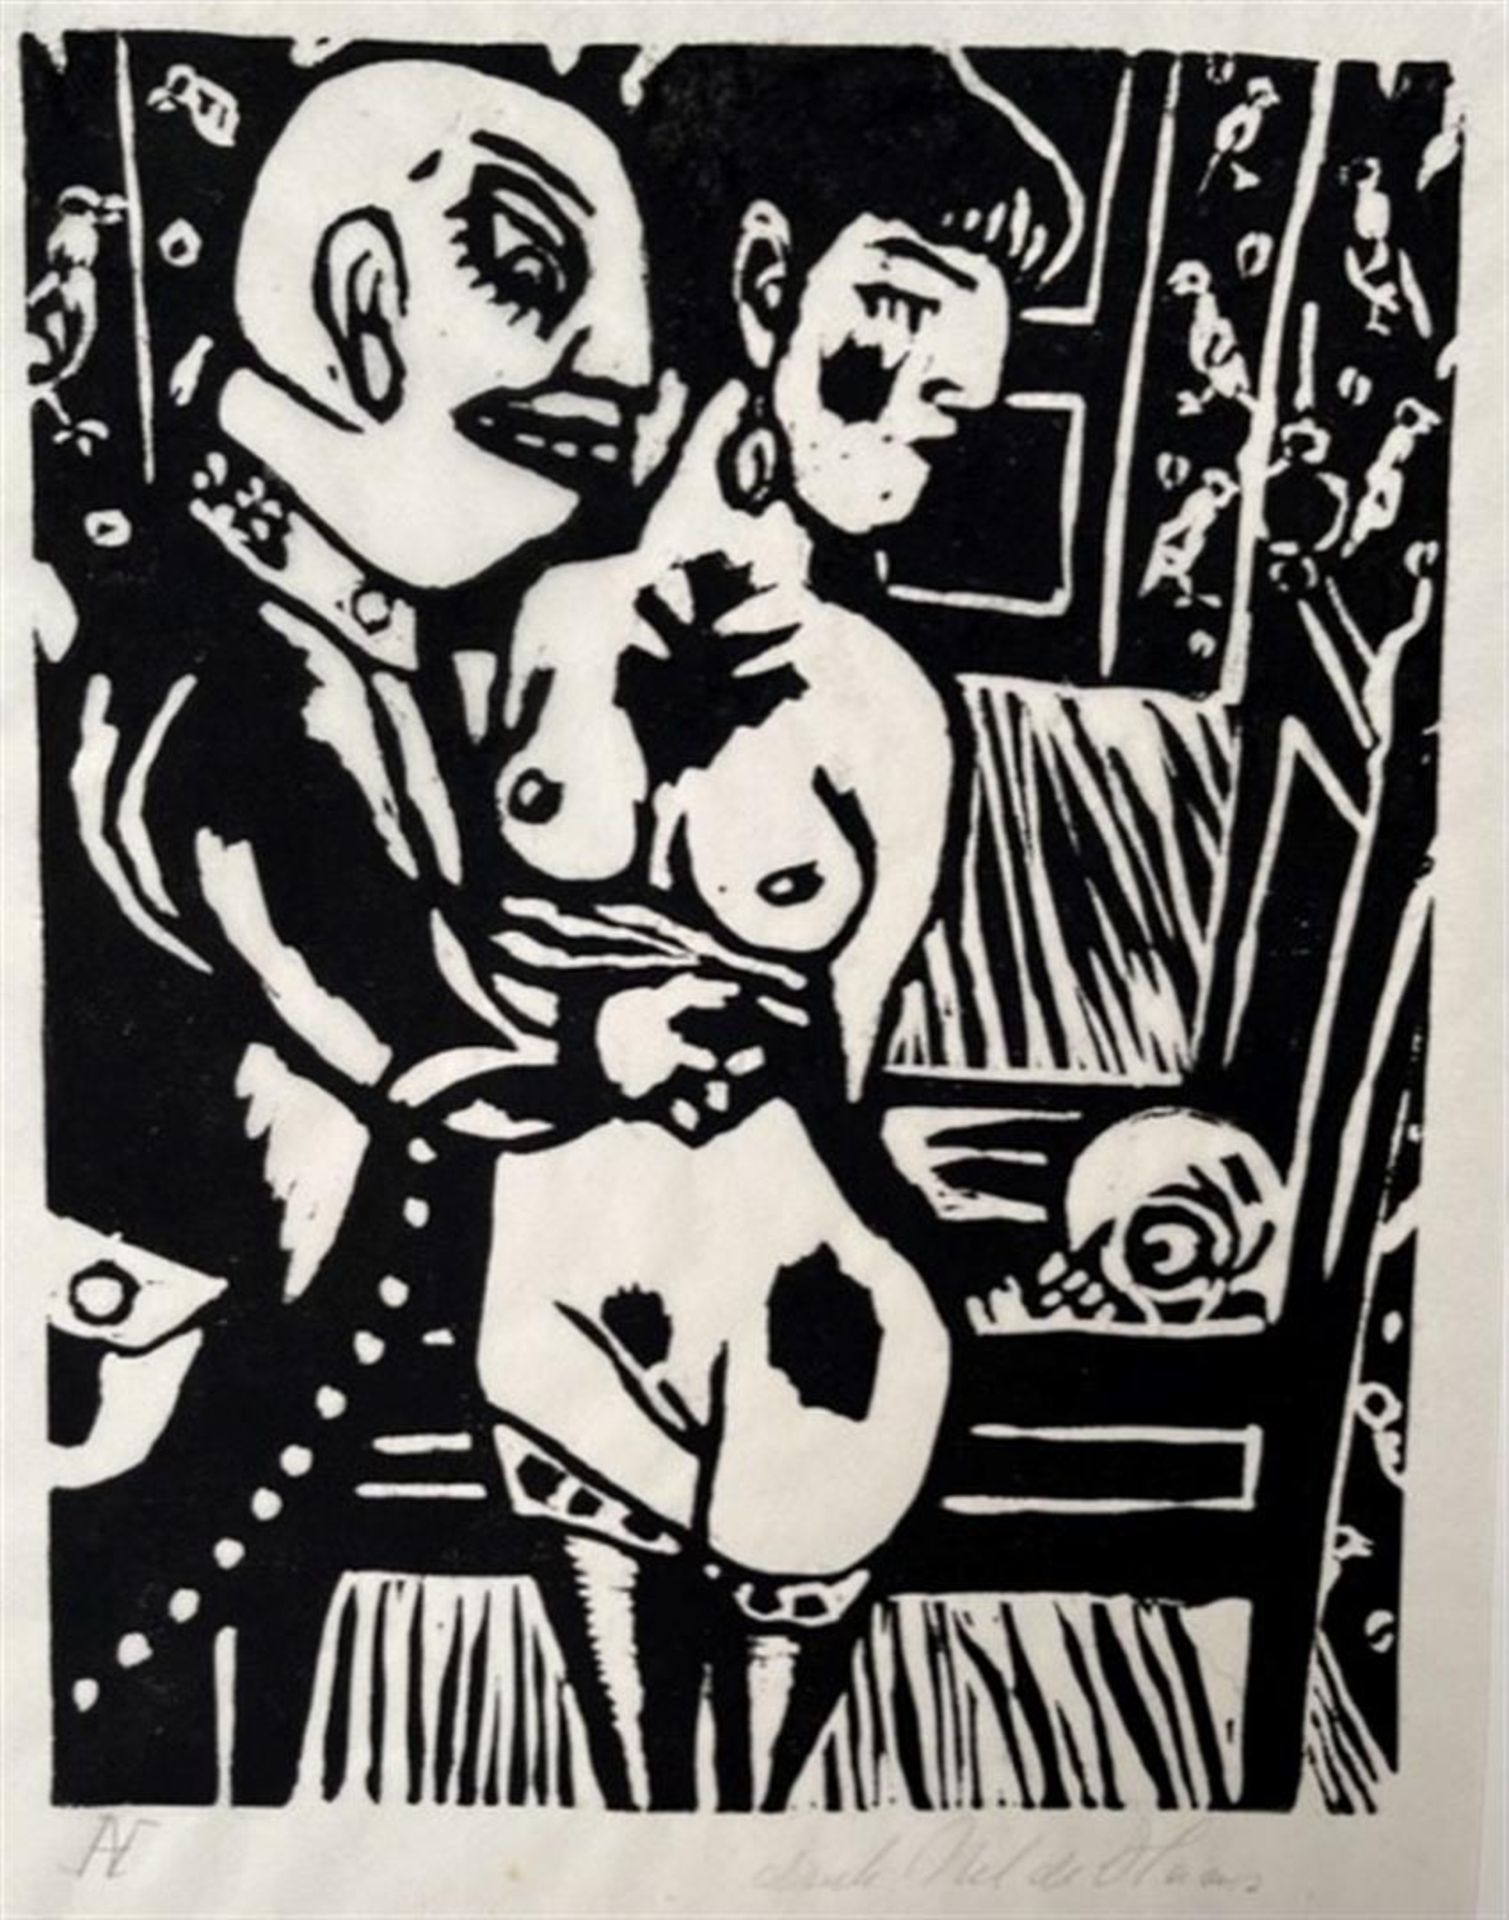 Aad de Haas (Rotterdam 1920 - 1972 Schaesberg), Death and the girl, a folder with 20 linocuts printe - Image 3 of 5